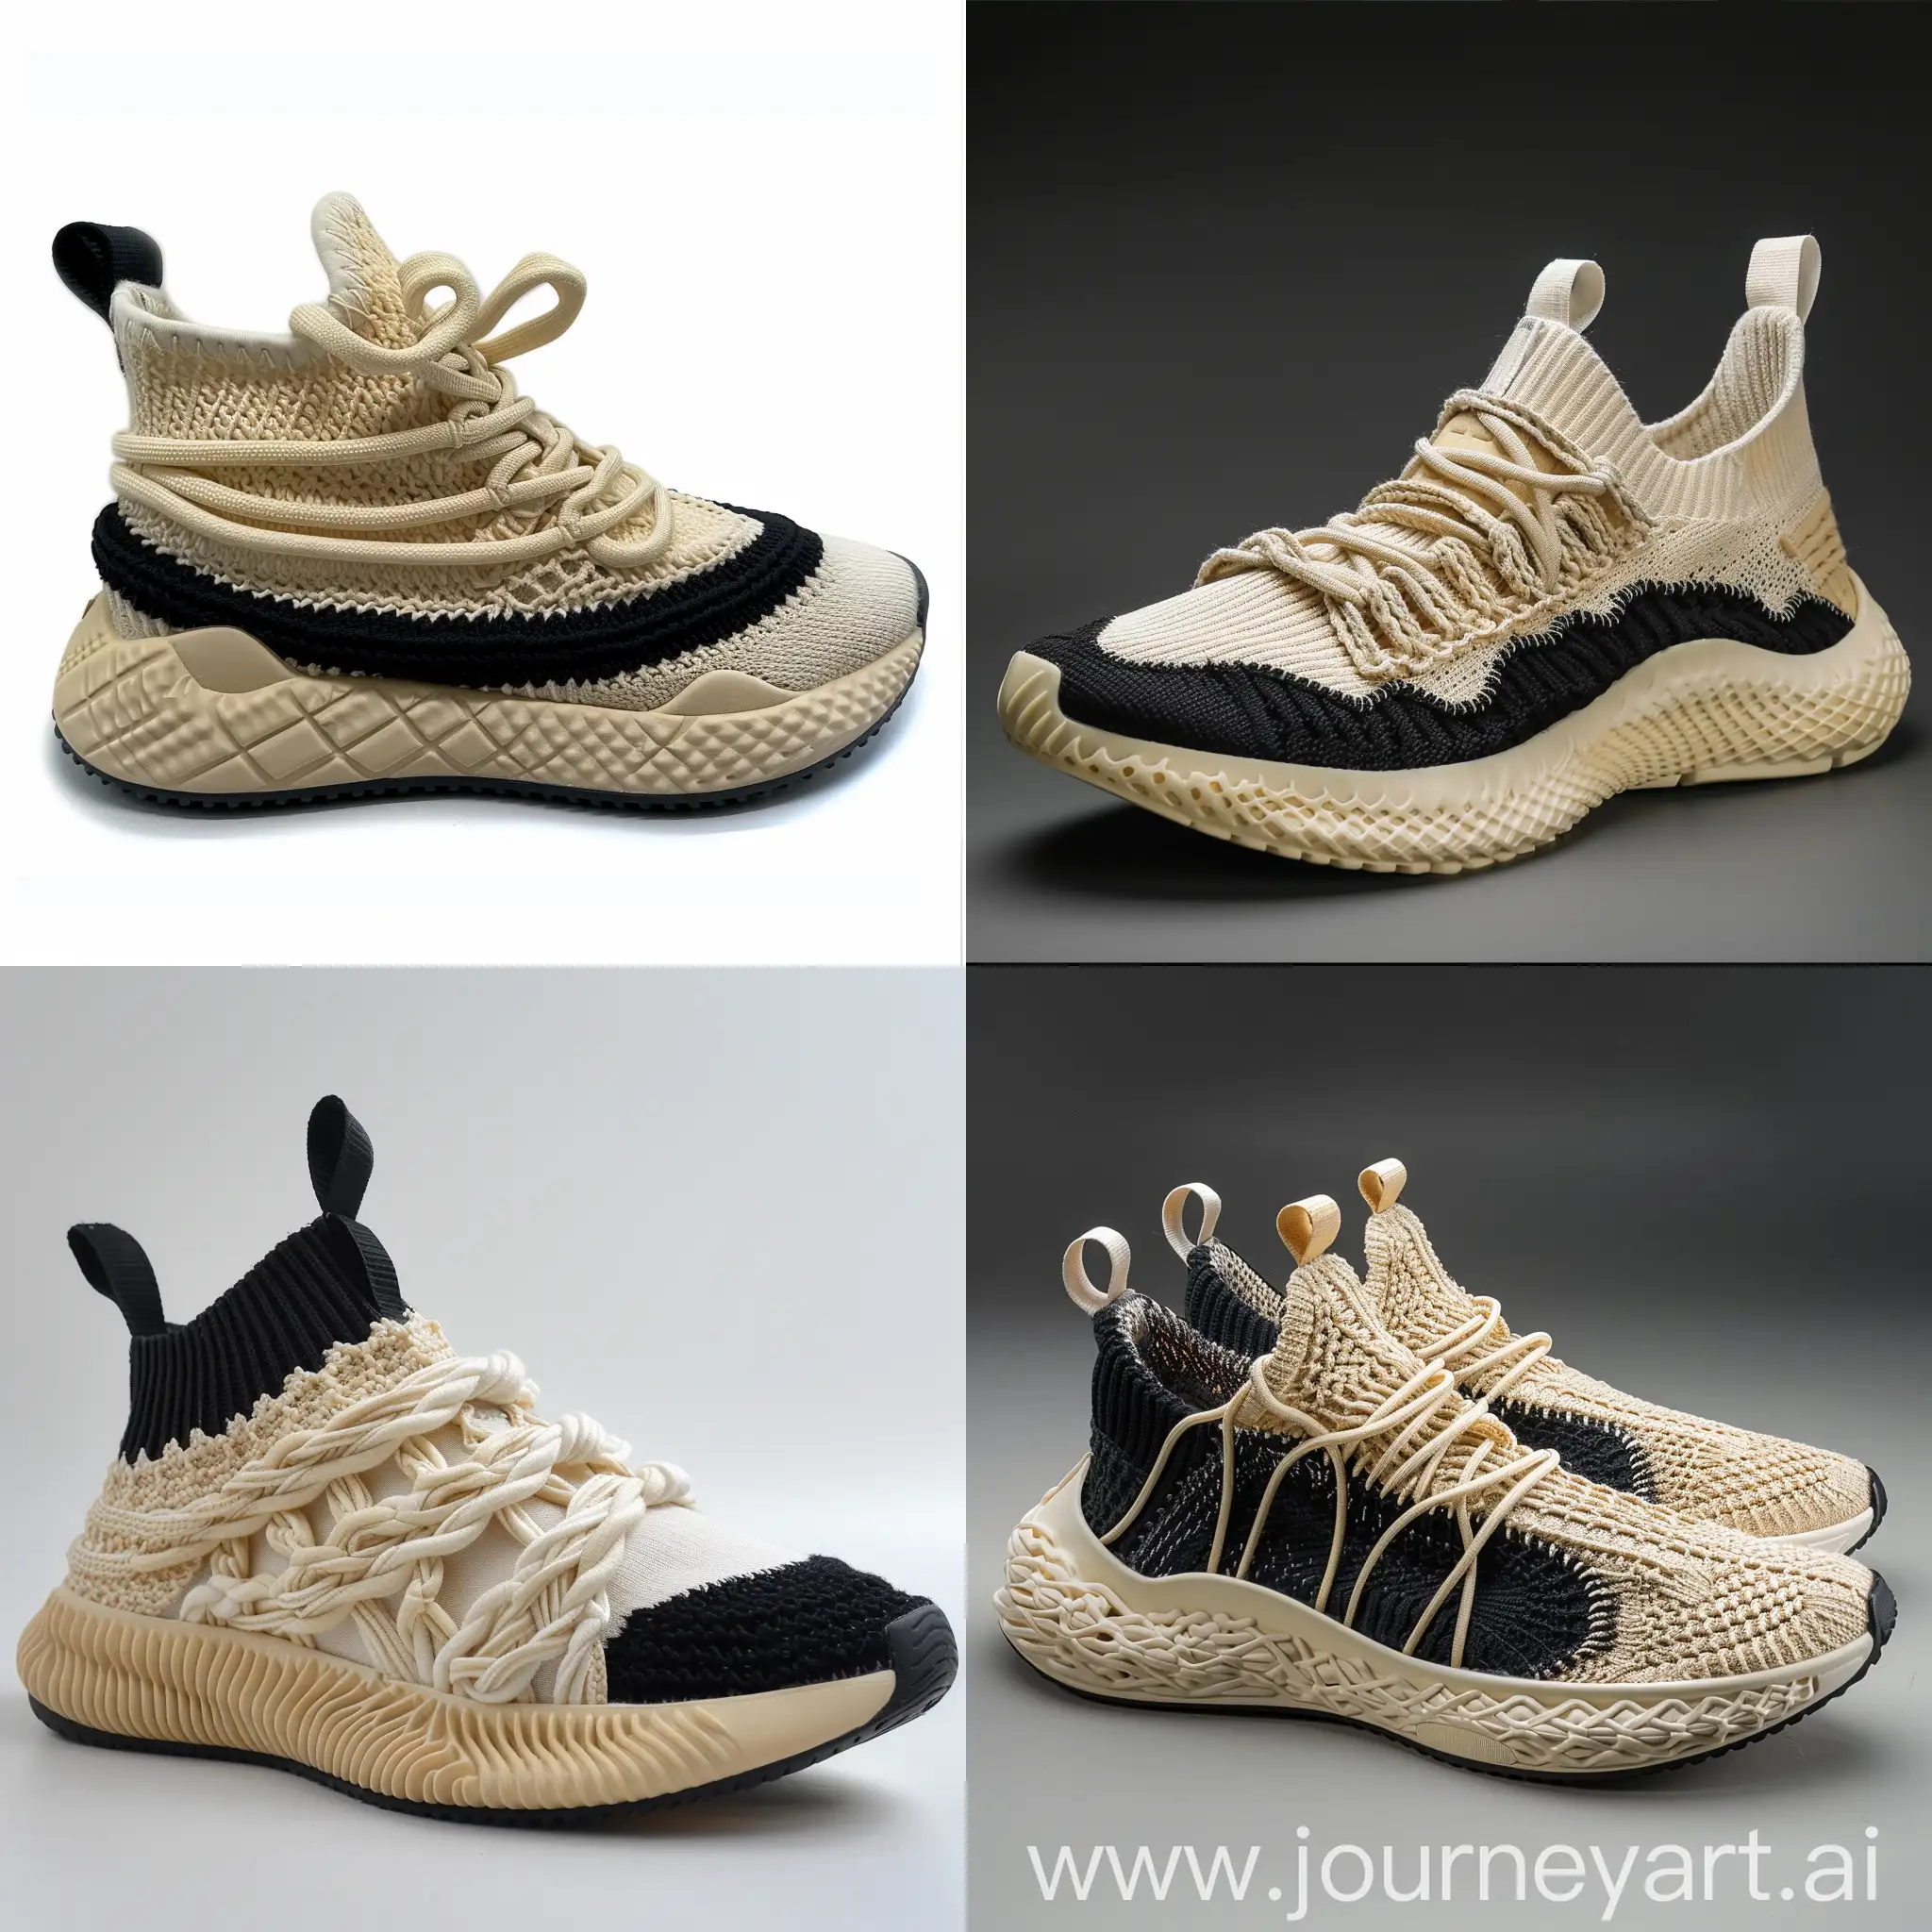 Sneakers design , running and sports , inspired by knitted fabrics , cream color rubber midsole , knitted cables on midsole , some knitted cables on upper , upper color black and cream , low neck , black outsole , knitted laces ,
Beige tail